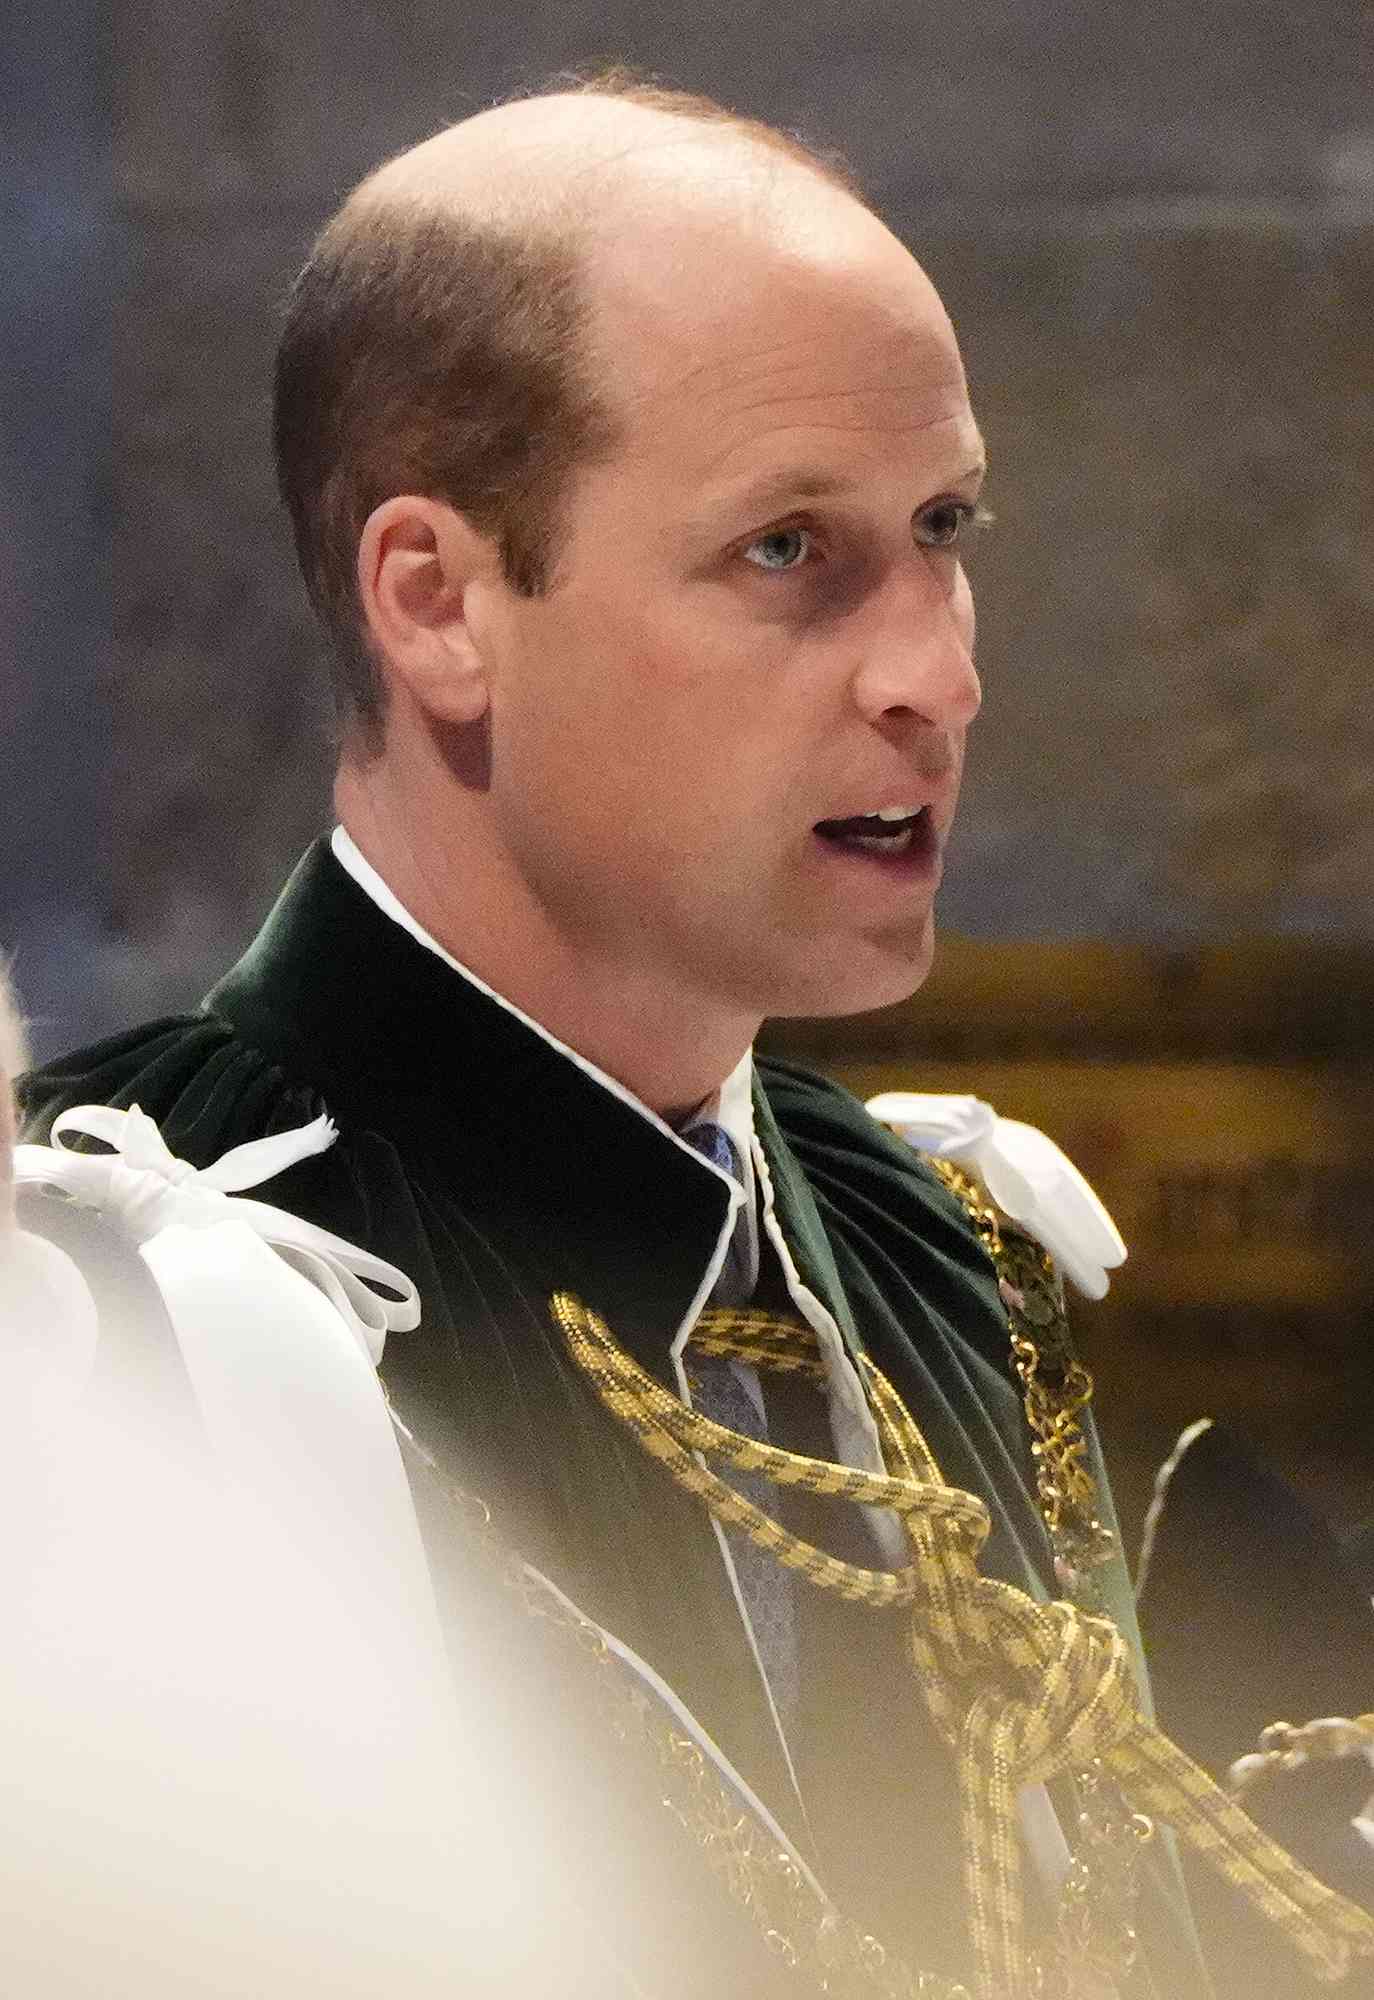 Prince William, Prince of Wales, known as the Duke of Rothesay when in Scotland, arrives for the Order of the Thistle Service at St Giles' Cathedral 